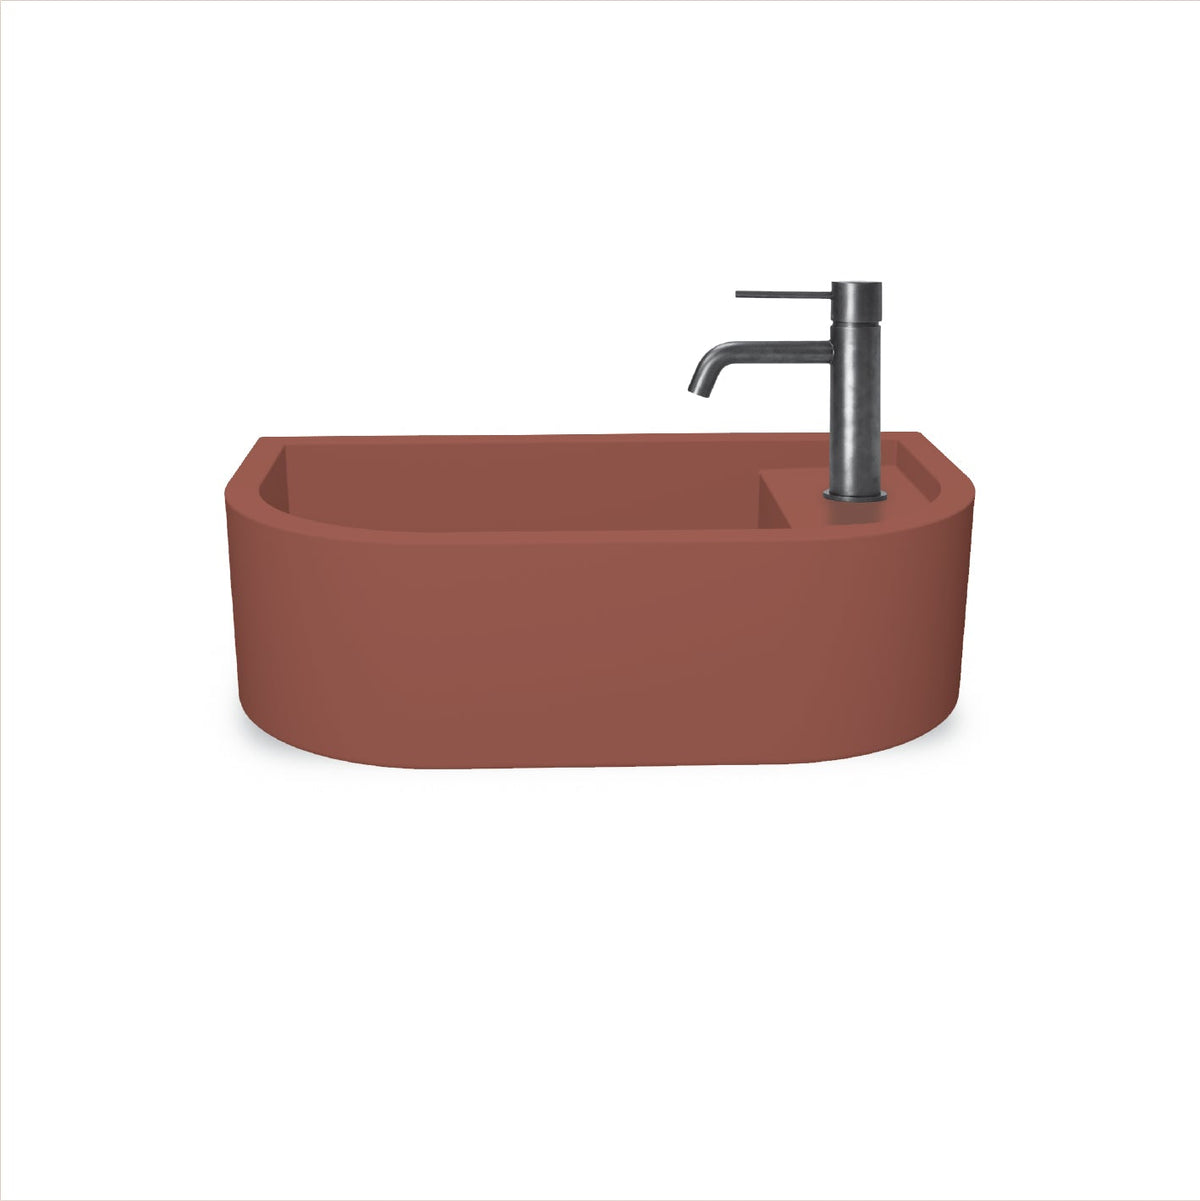 Loop 01 Basin - Overflow - Wall Hung (Musk,Tap Hole,White)